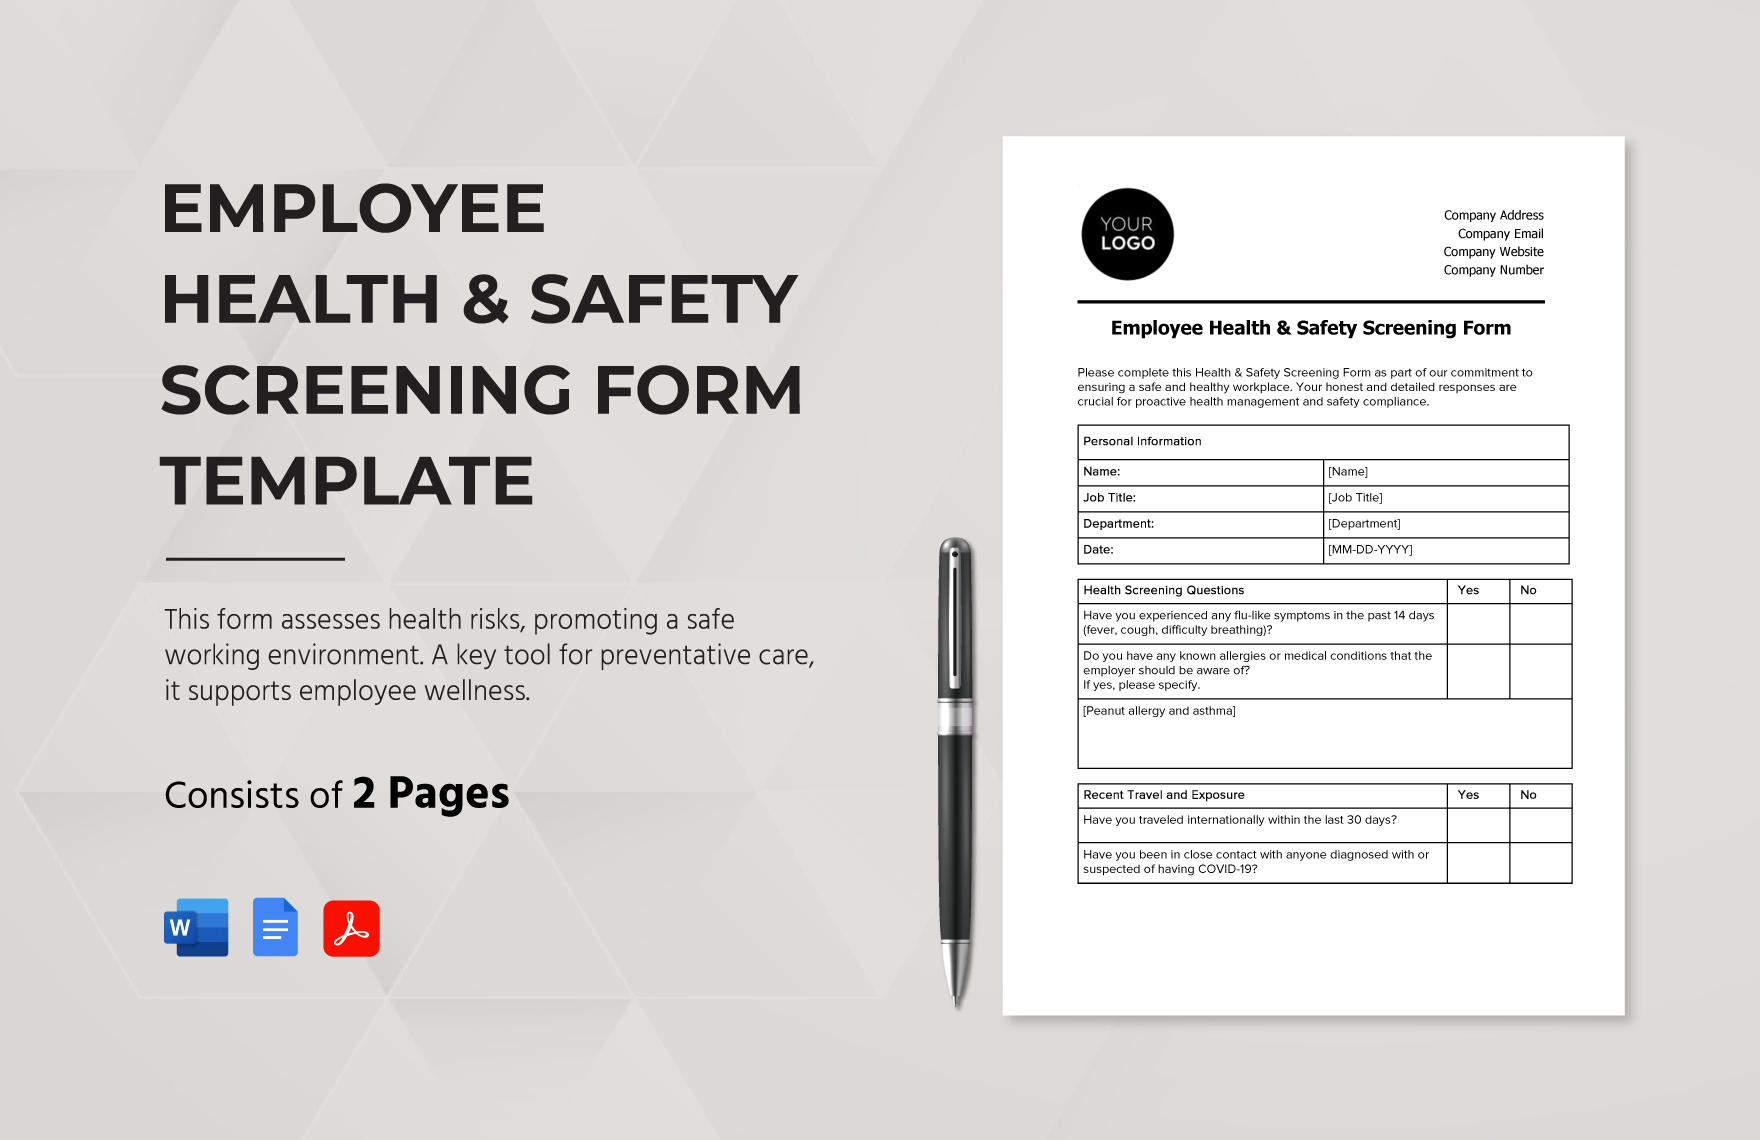 Employee Health & Safety Screening Form Template